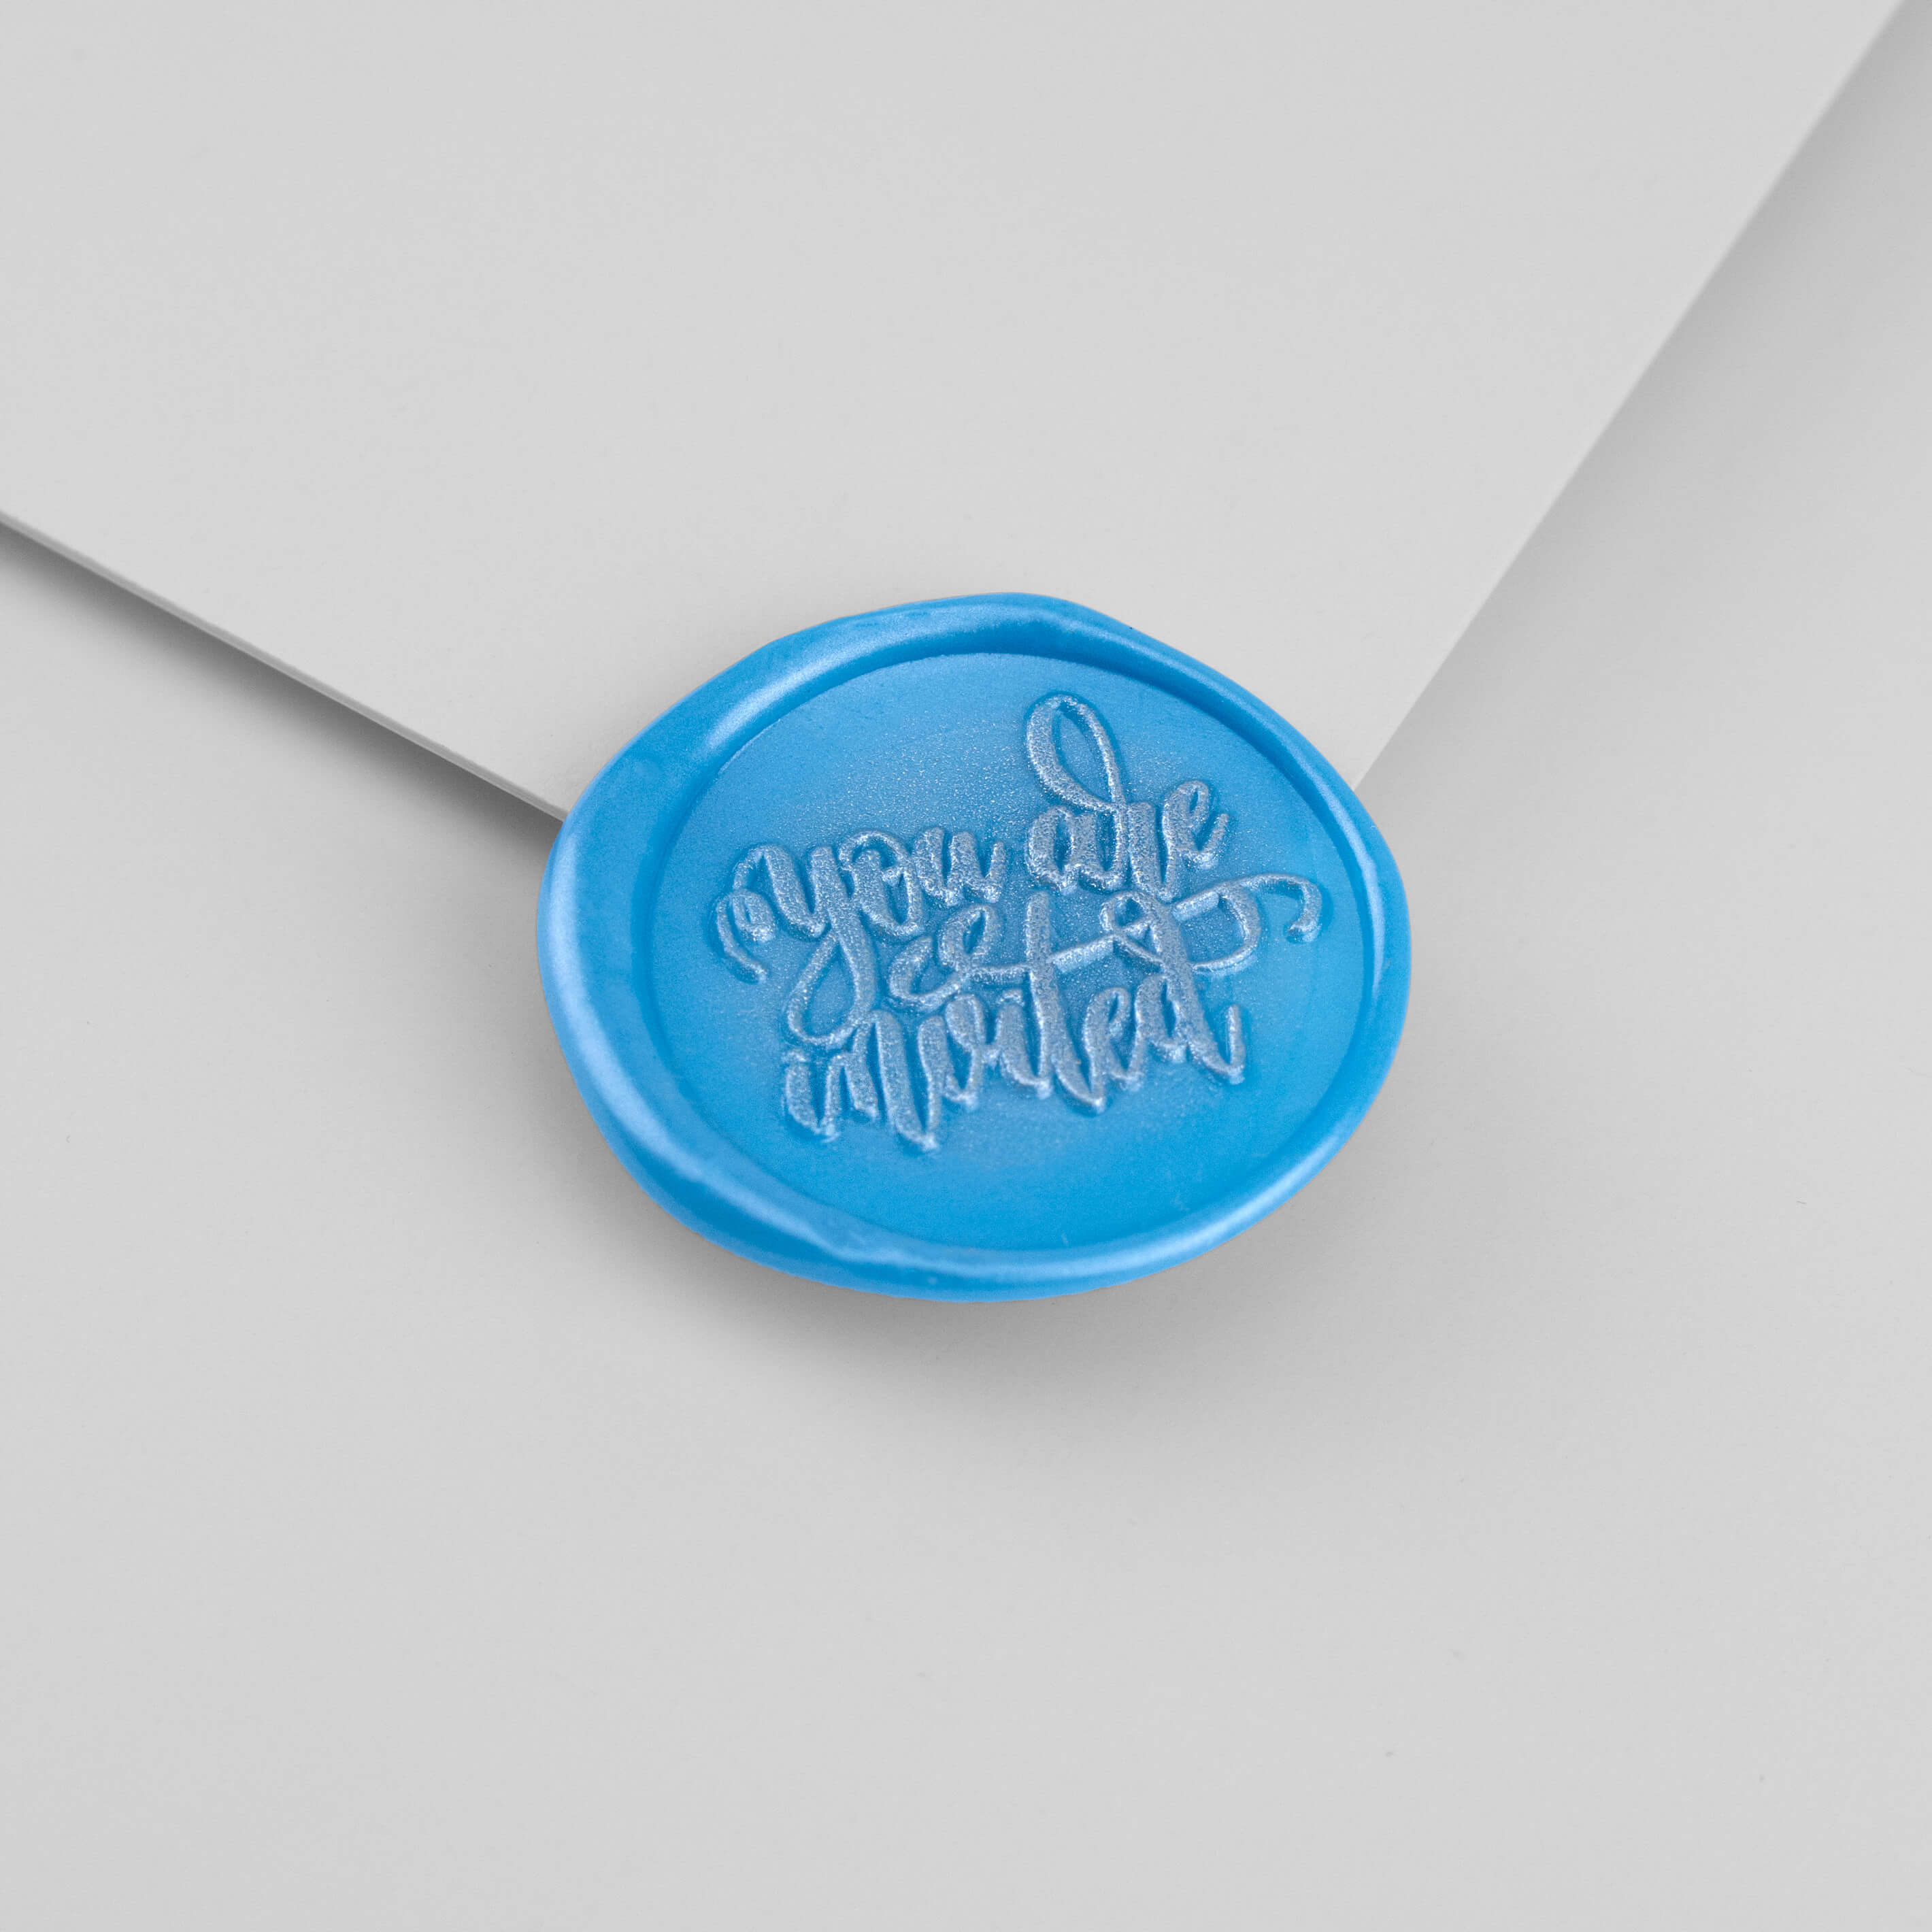 Wax Seal Stamp - You Are Invited - Kustom Haus